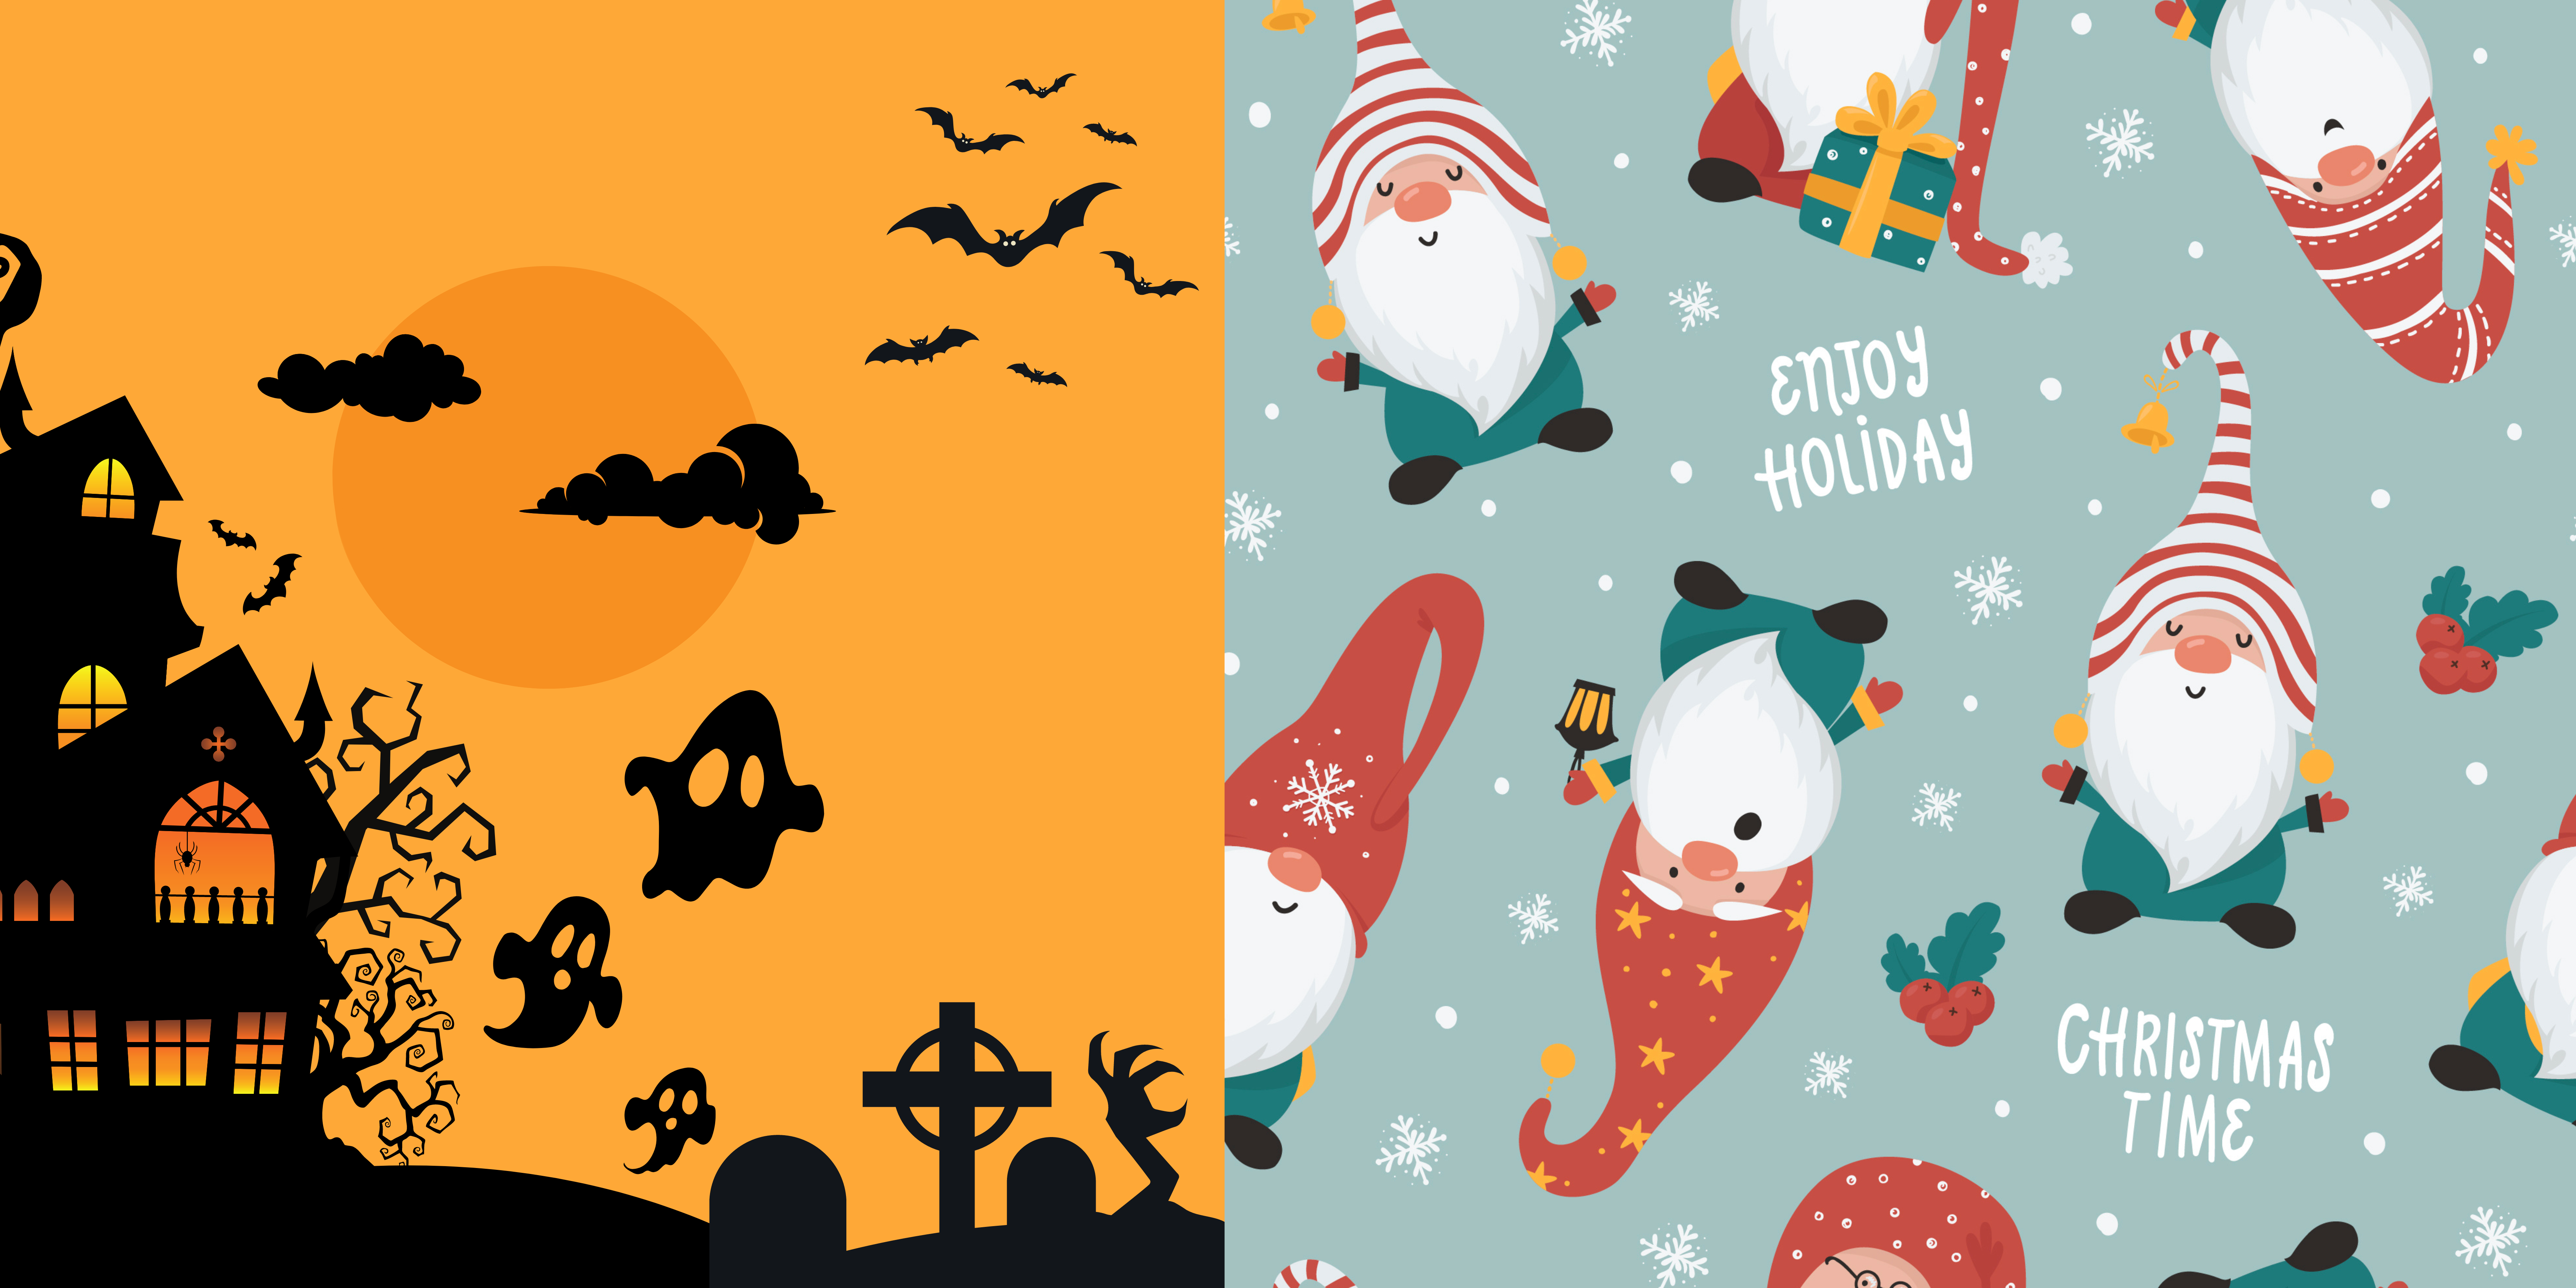 Christmas Vs Halloween - Only one can win. Haunted House image alongside Christmas Gonks.